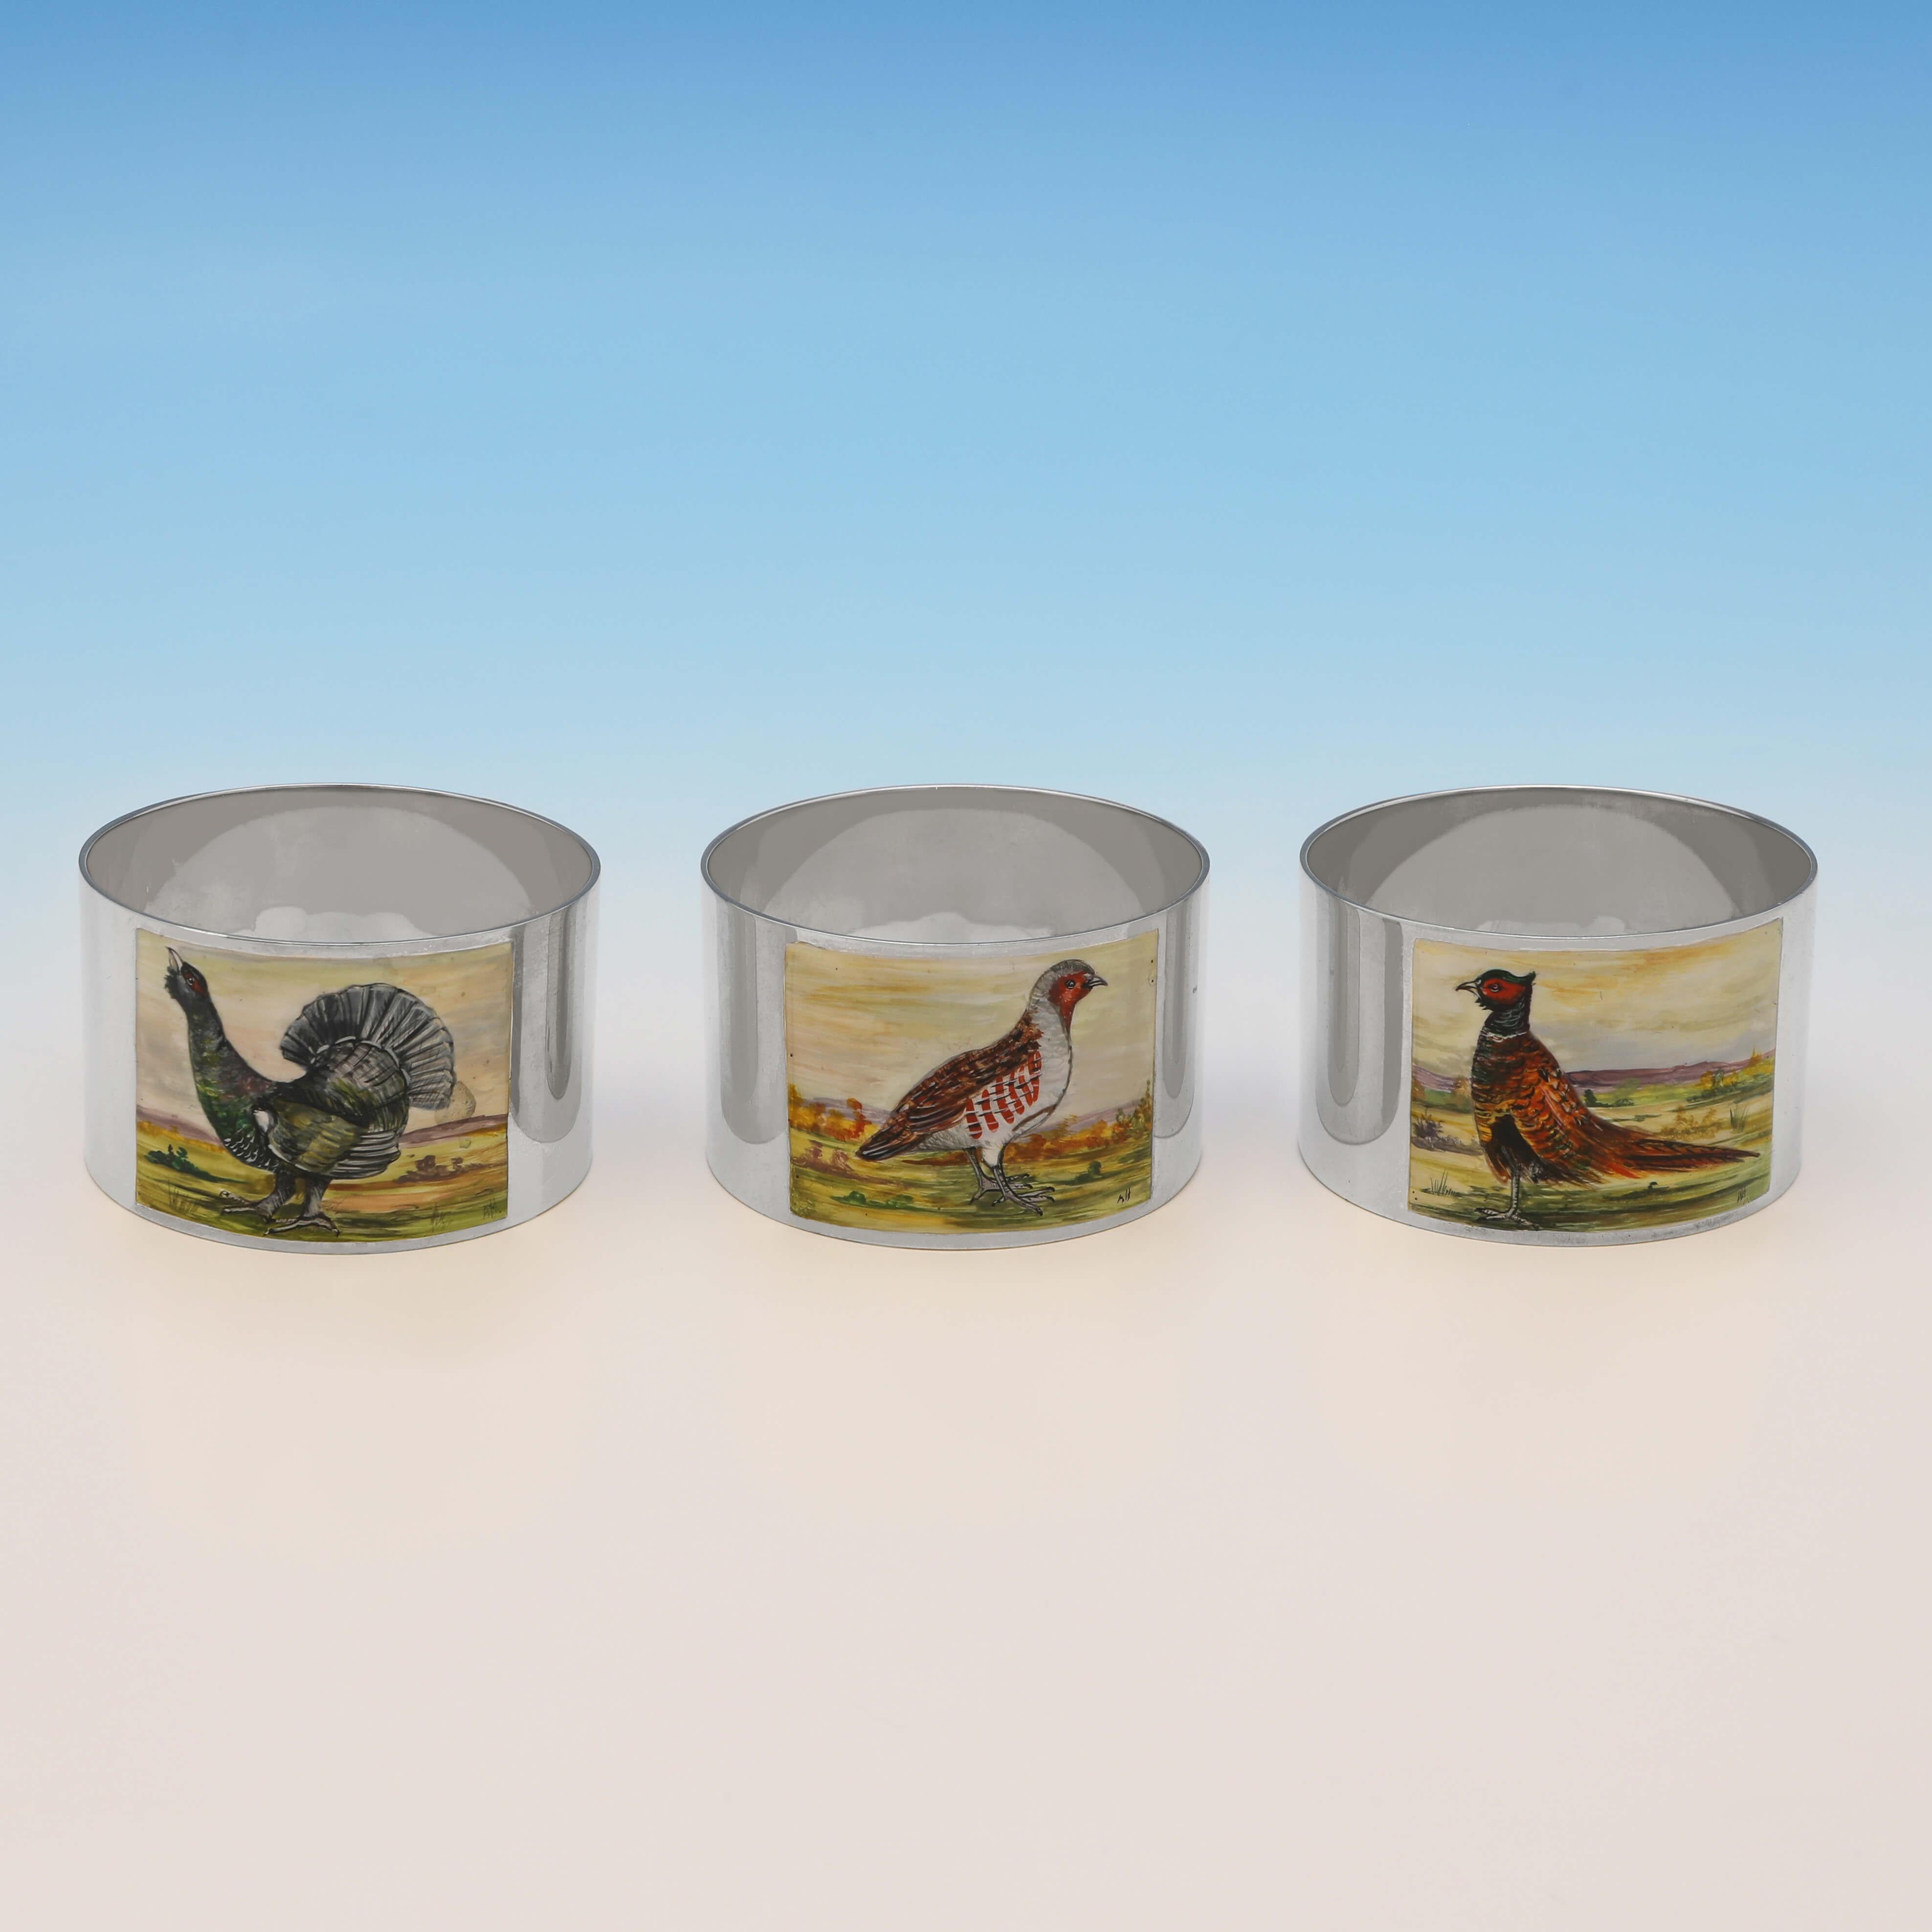 Hallmarked in Birmingham in 1993 by W. I. Broadway & Co., this attractive set of 6 Sterling Silver Napkin Rings, each feature a different enamelled scene depicting game birds. Each napkin ring measures 1